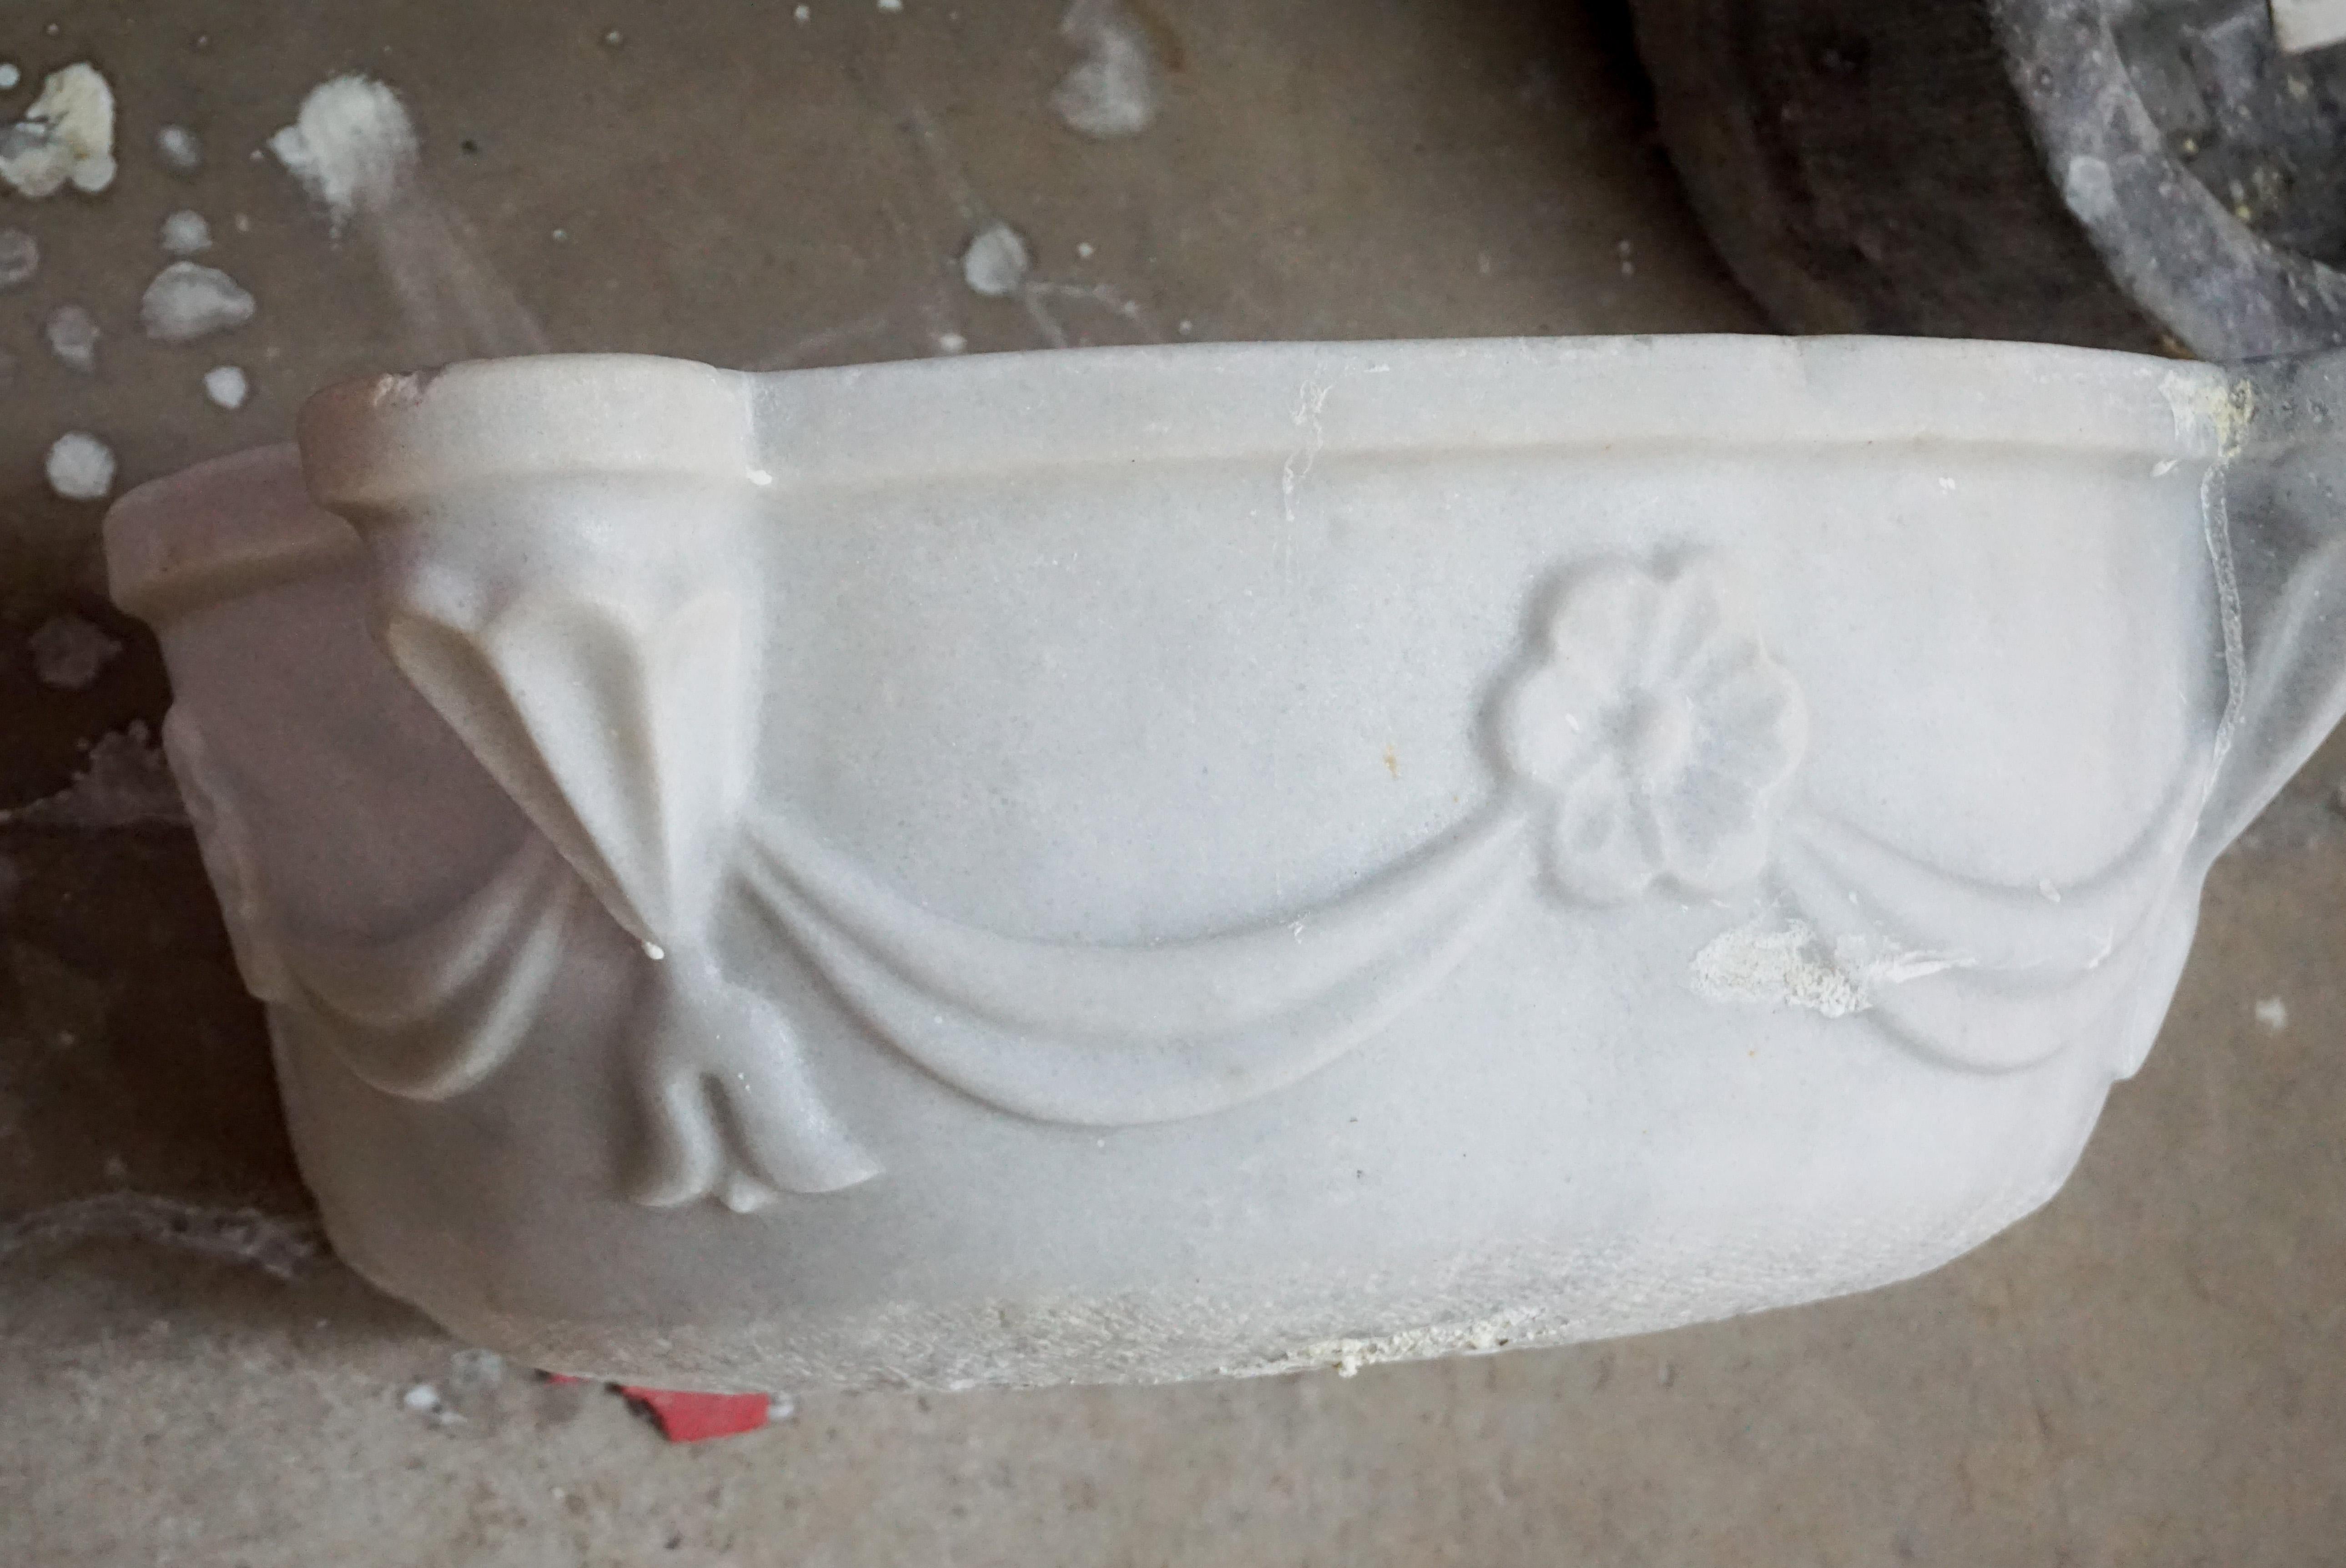 Antique white marble sink with a swag and floral design, circa 1850.